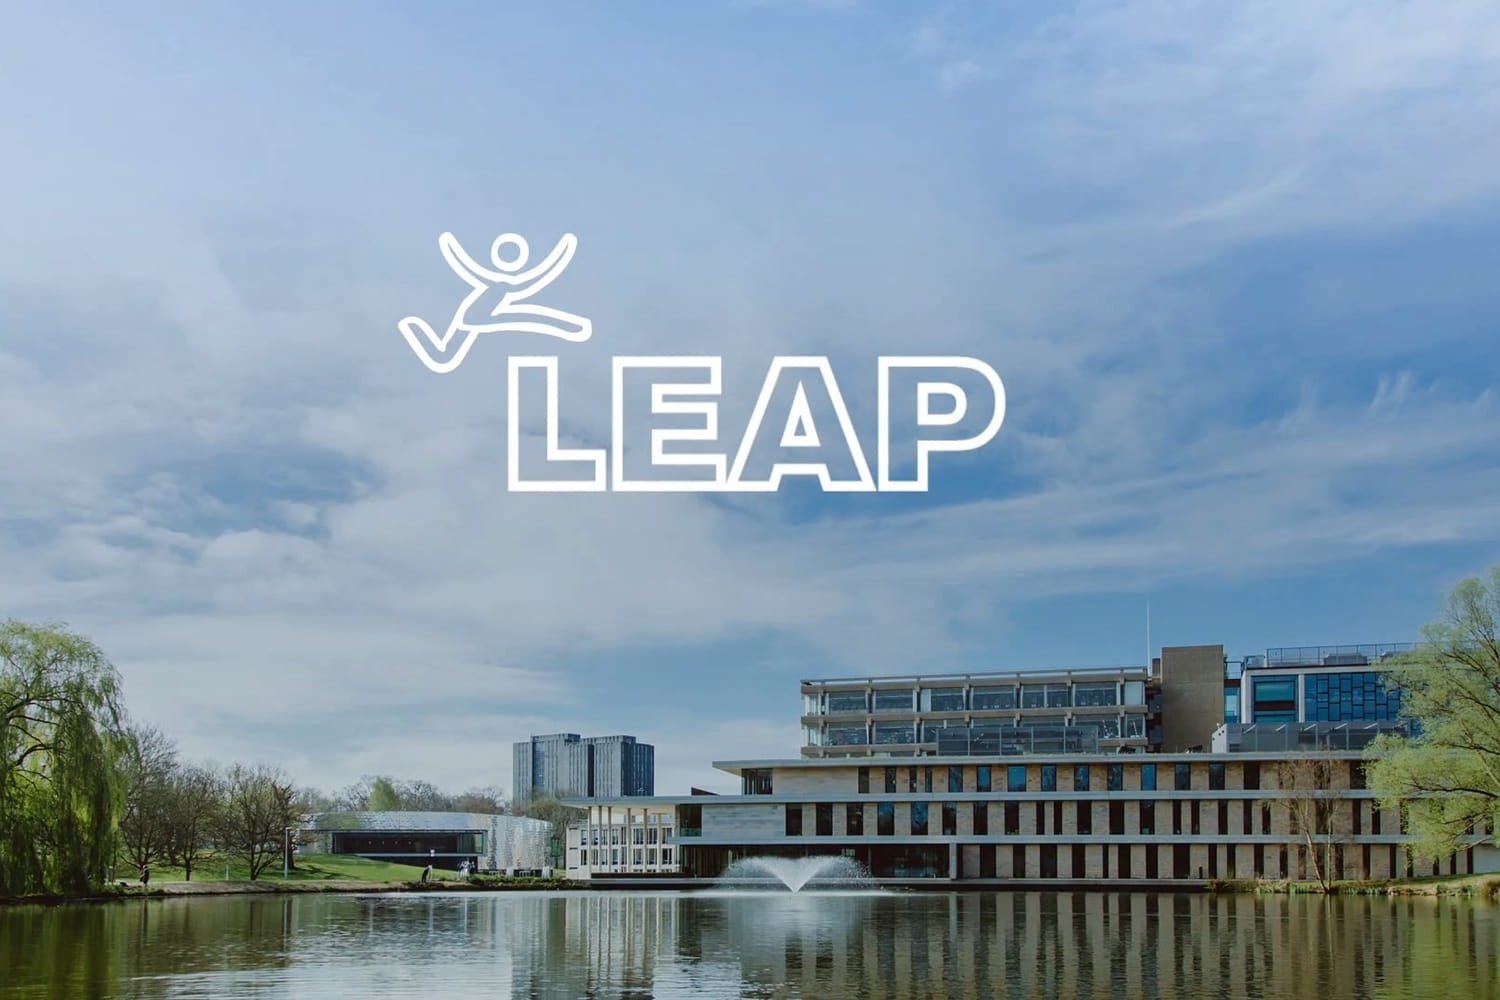 All about LEAP